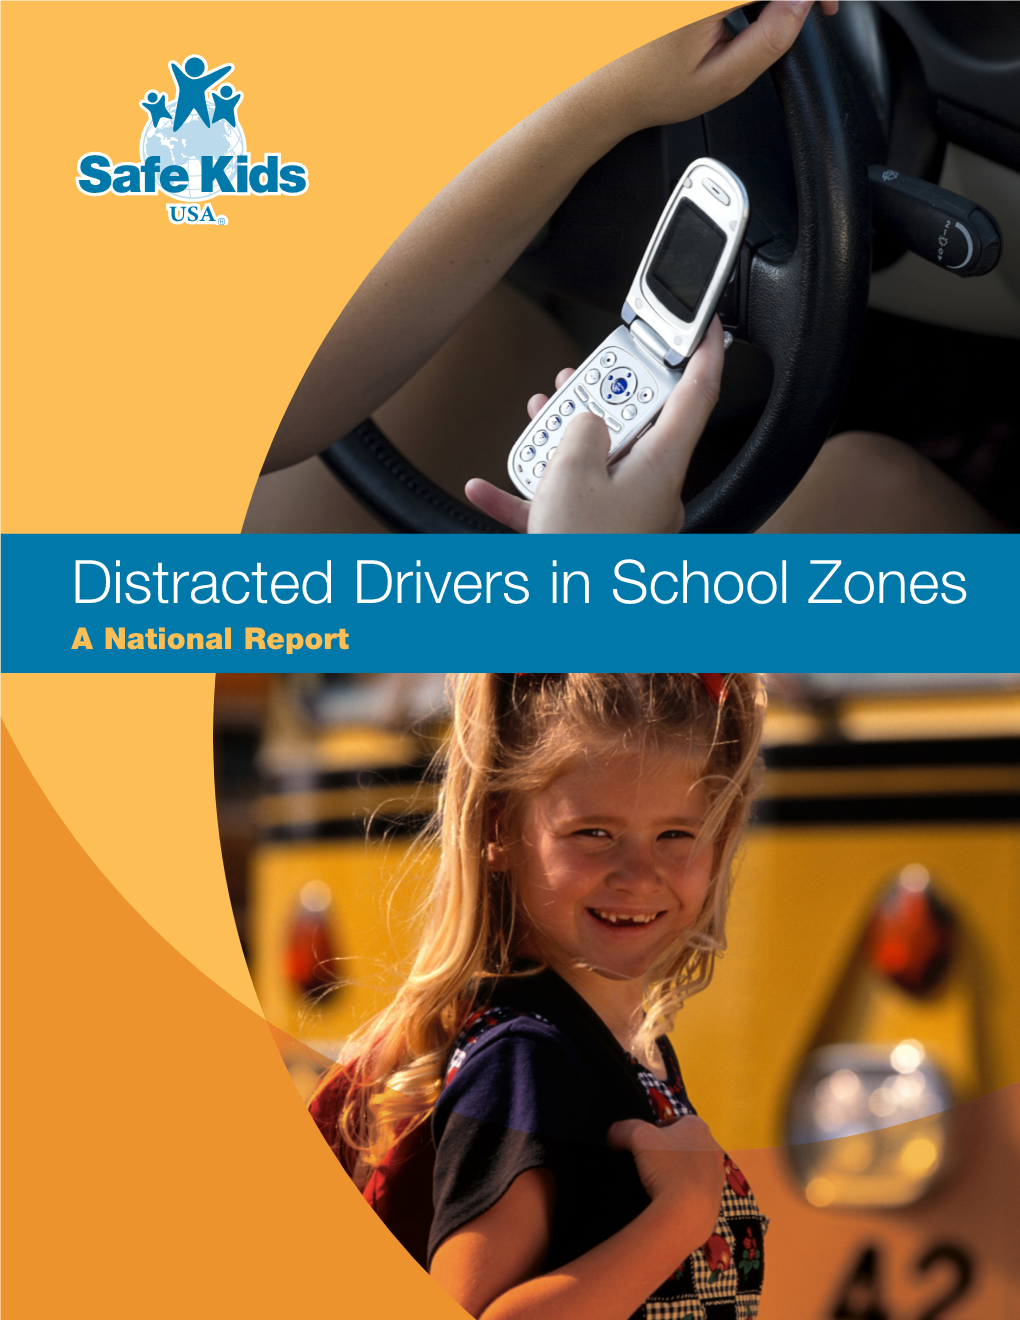 Distracted Drivers in School Zones a National Report